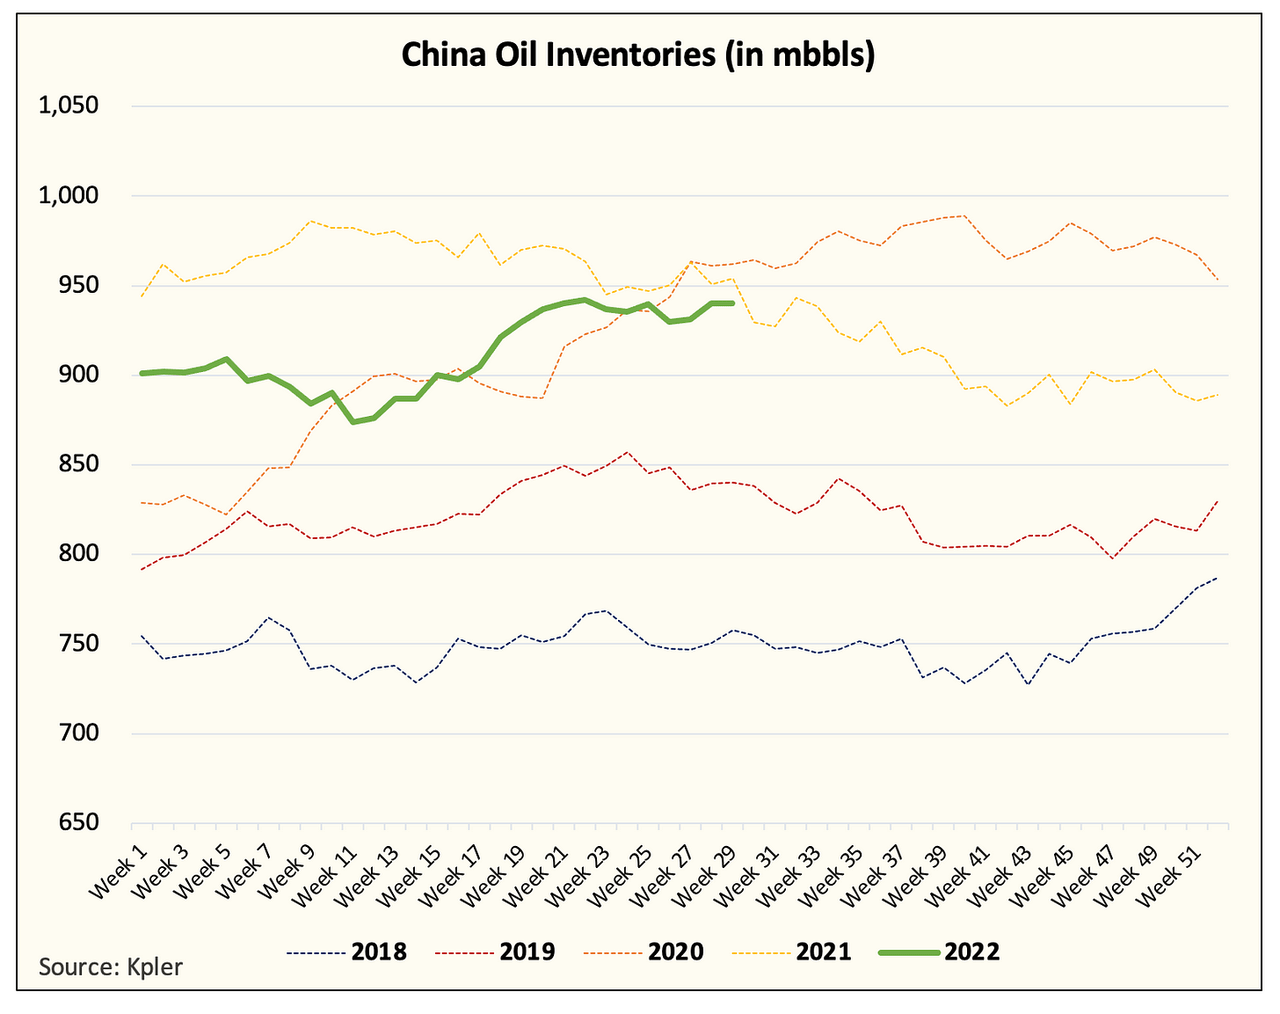 China's oil inventories